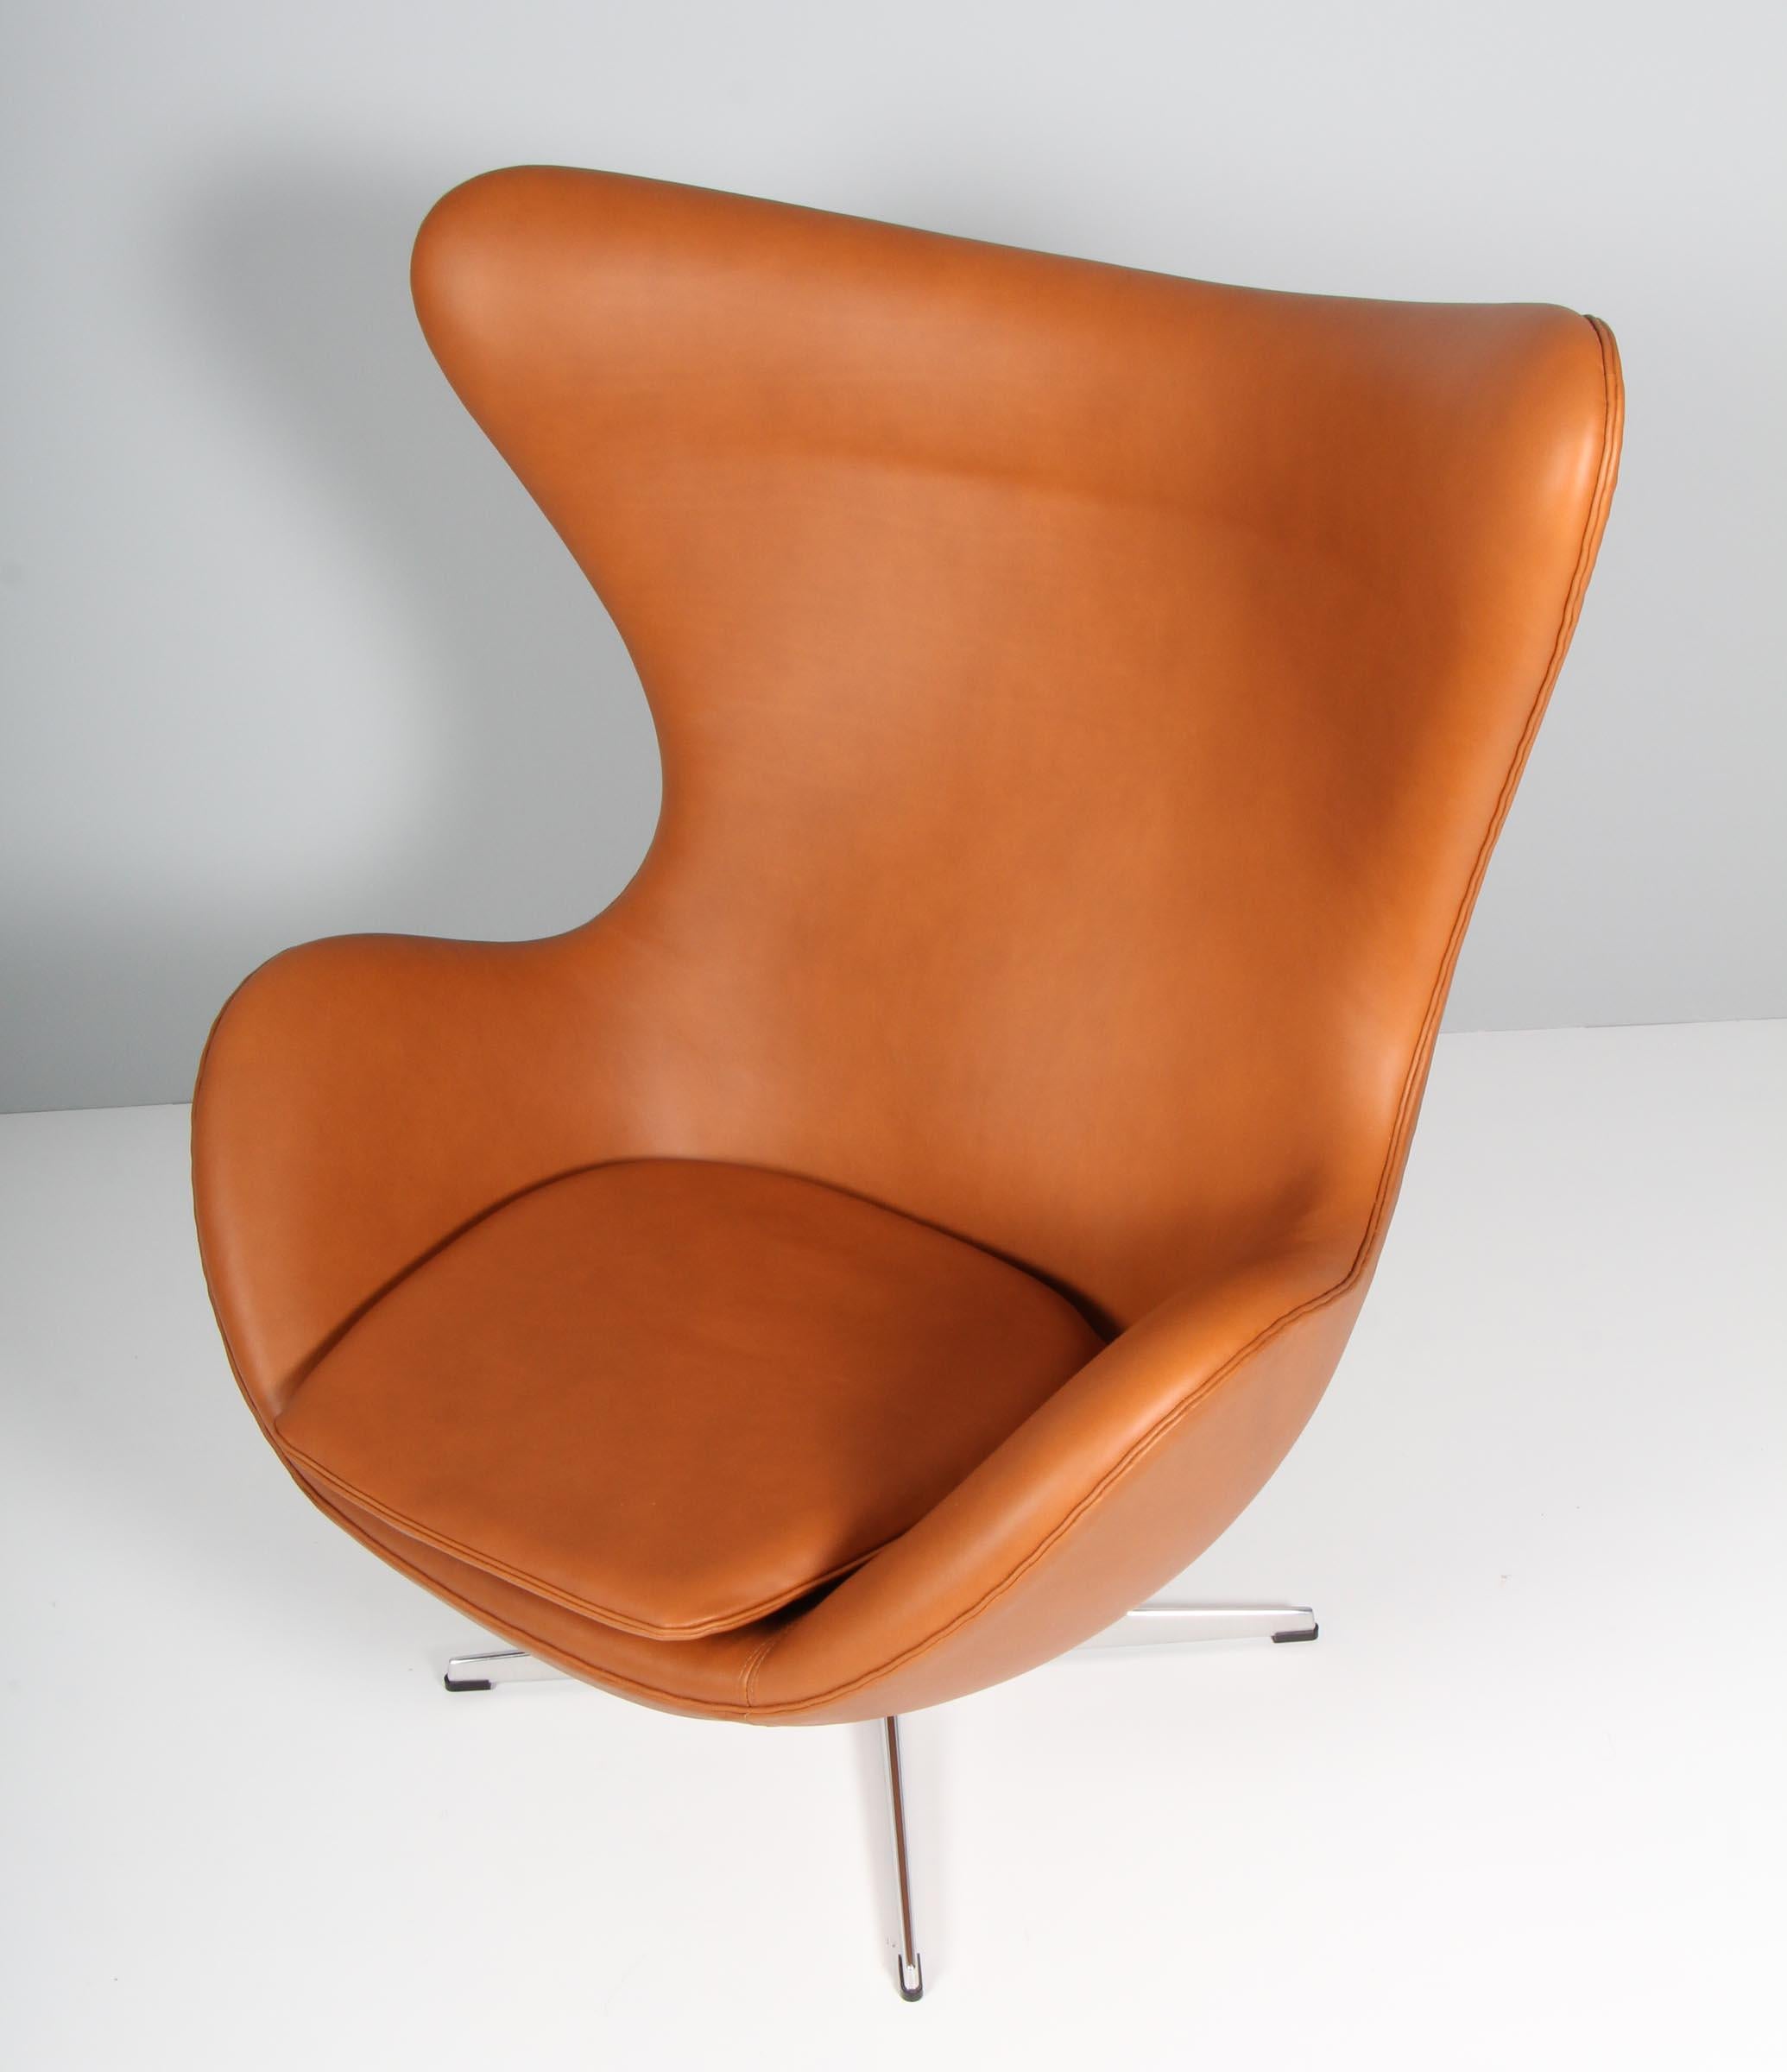 Arne Jacobsen set of lounge chairs model Egg. New upholstered with Nevada cognac aniline leather.

Four star base.

Made by Fritz Hansen.

This iconic chair is one of the most famous chairs in the world and is recognized by design lovers in